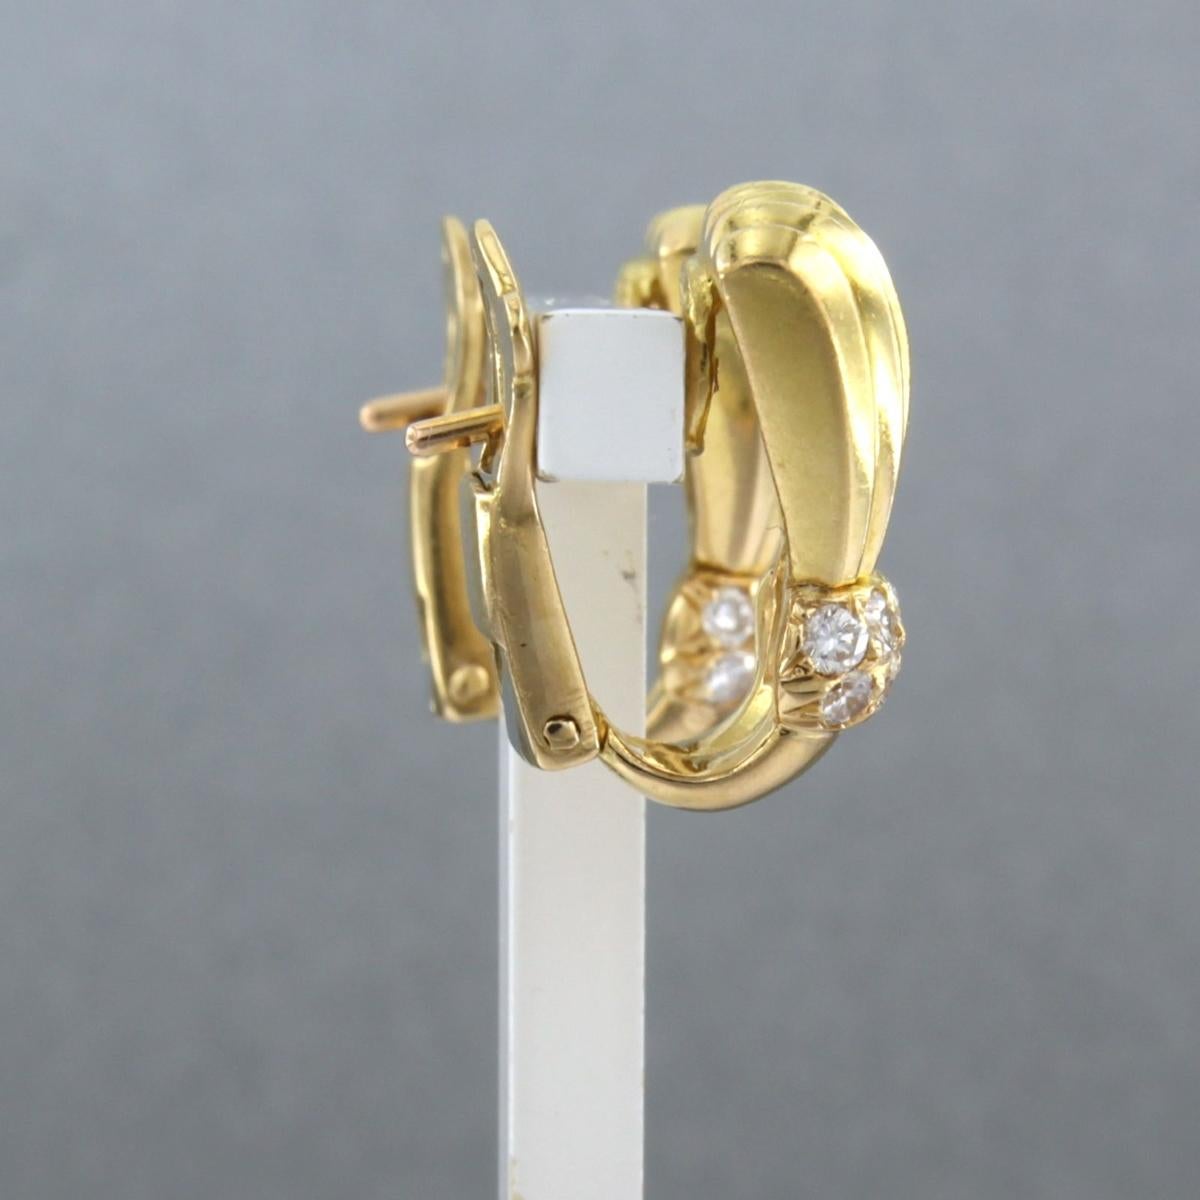 Earrings set with brilliant cut diamonds up to 0.50ct 18k yellow gold For Sale 1